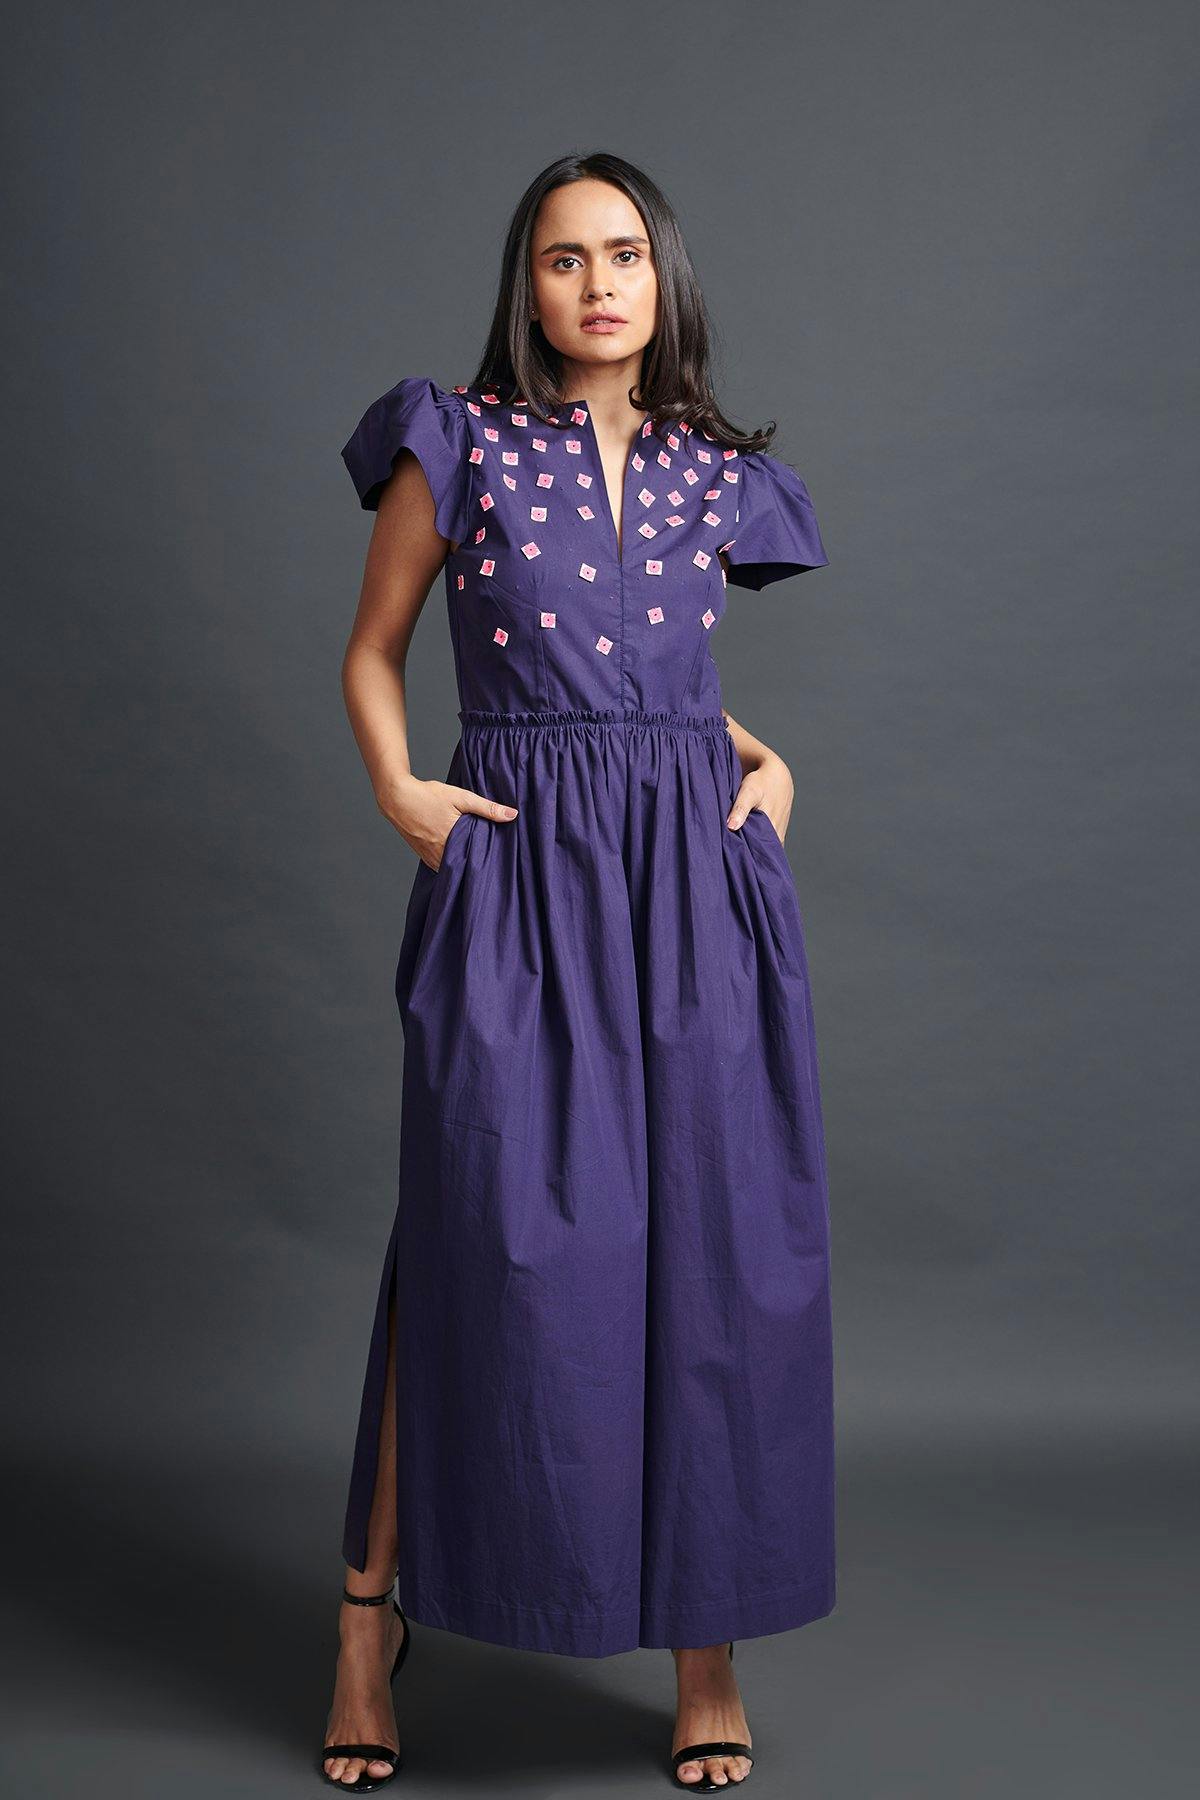 Purple jumpsuit with embroidery, a product by Deepika Arora